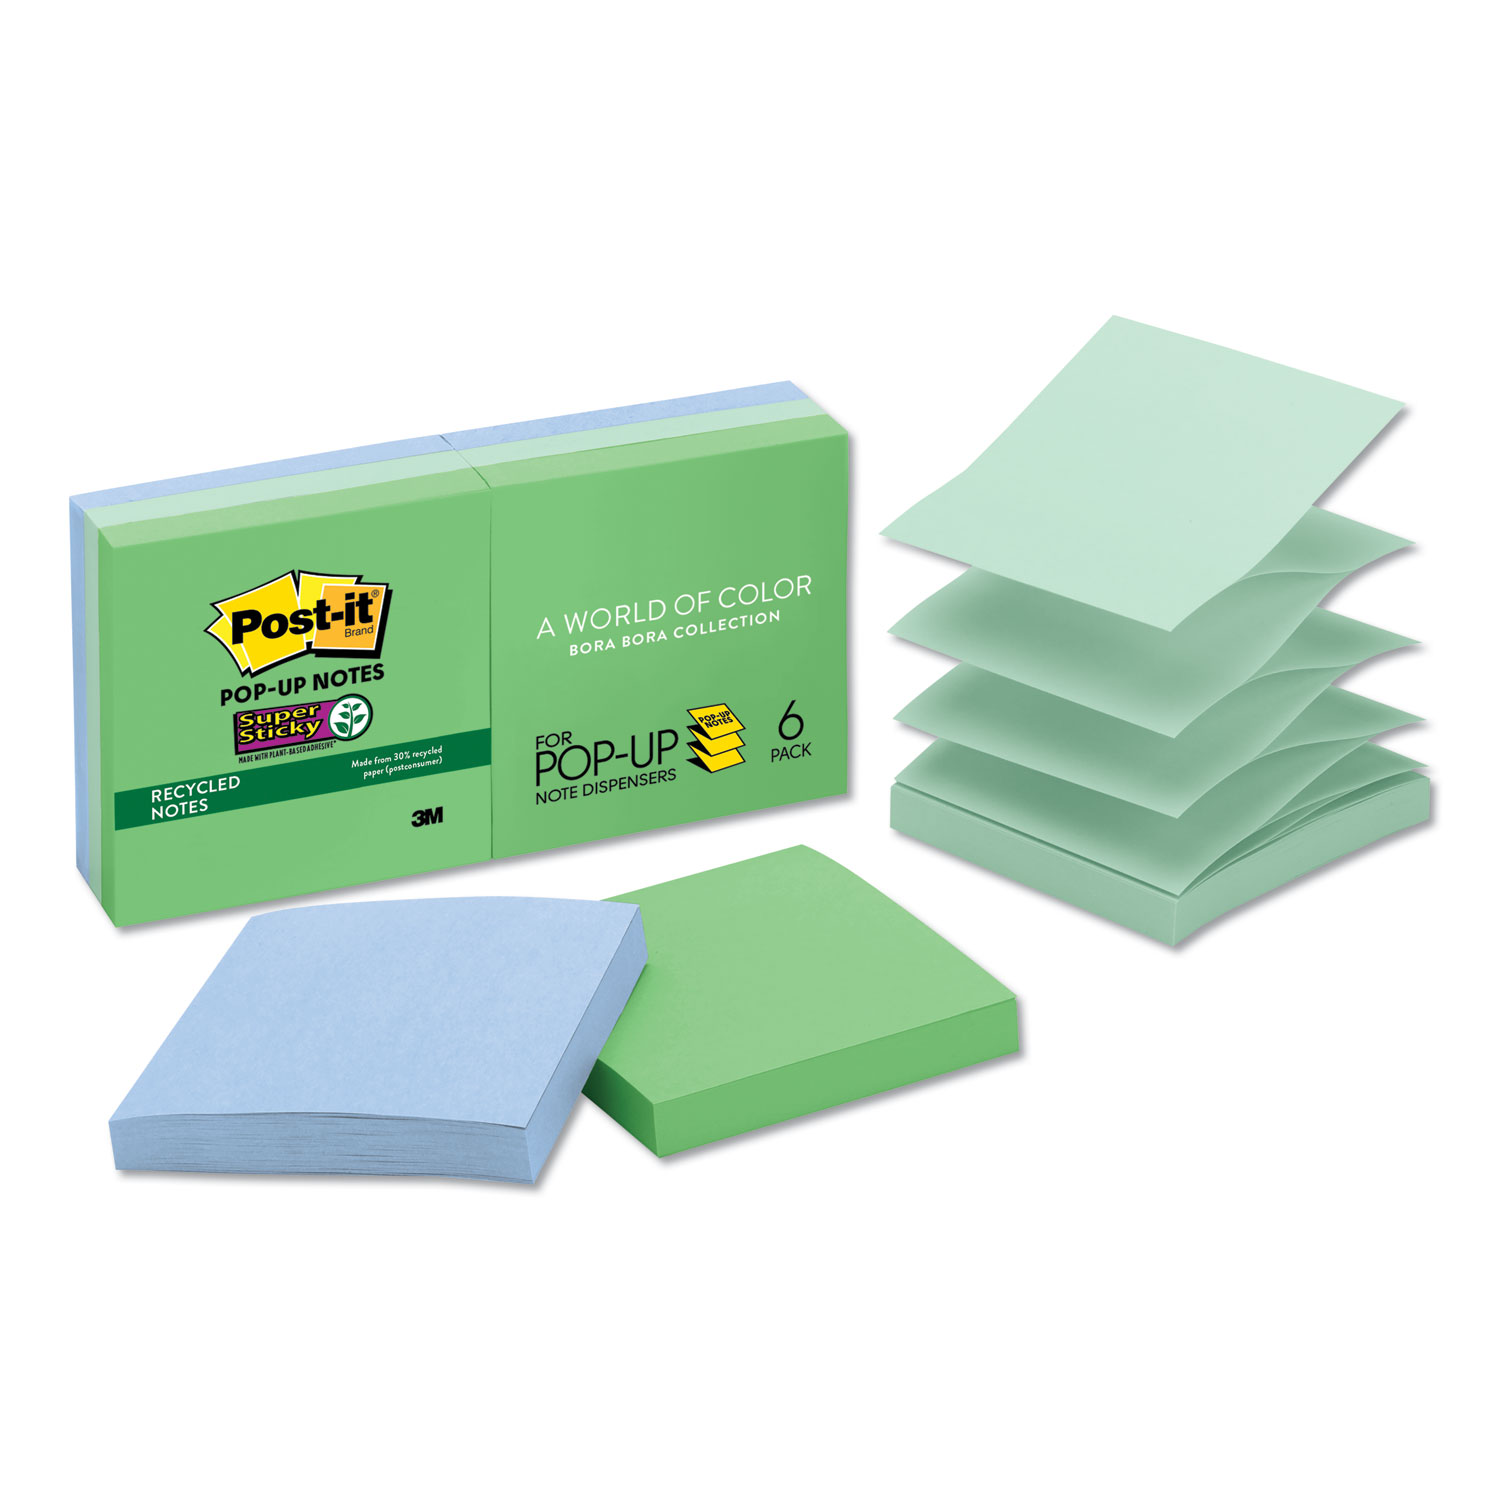  Post-it Pop-up Notes Super Sticky R330-6SST Pop-up Recycled Notes in Bora Bora Colors, 3 x 3, 90-Sheet, 6/Pack (MMMR3306SST) 